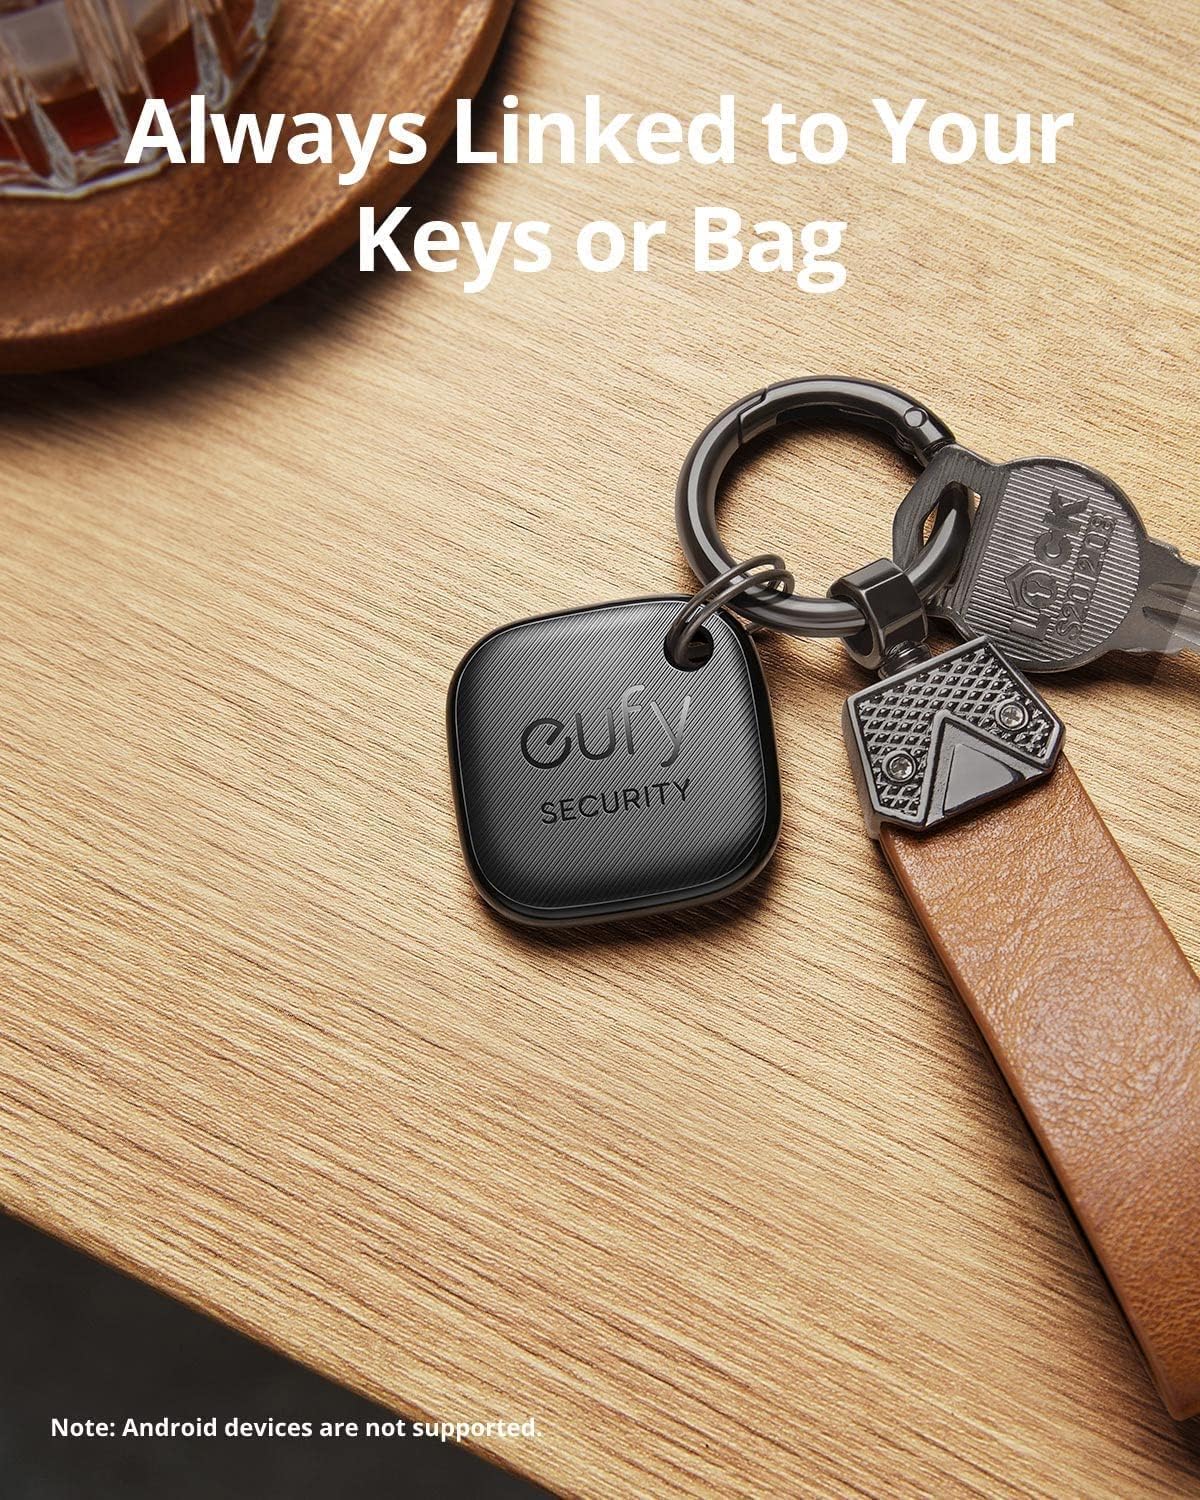 Anker Eufy Security SmartTrack Link Bluetooth Tracker for Earbuds and Luggage Water Resistant Works with Apple Find My - 1 Pack